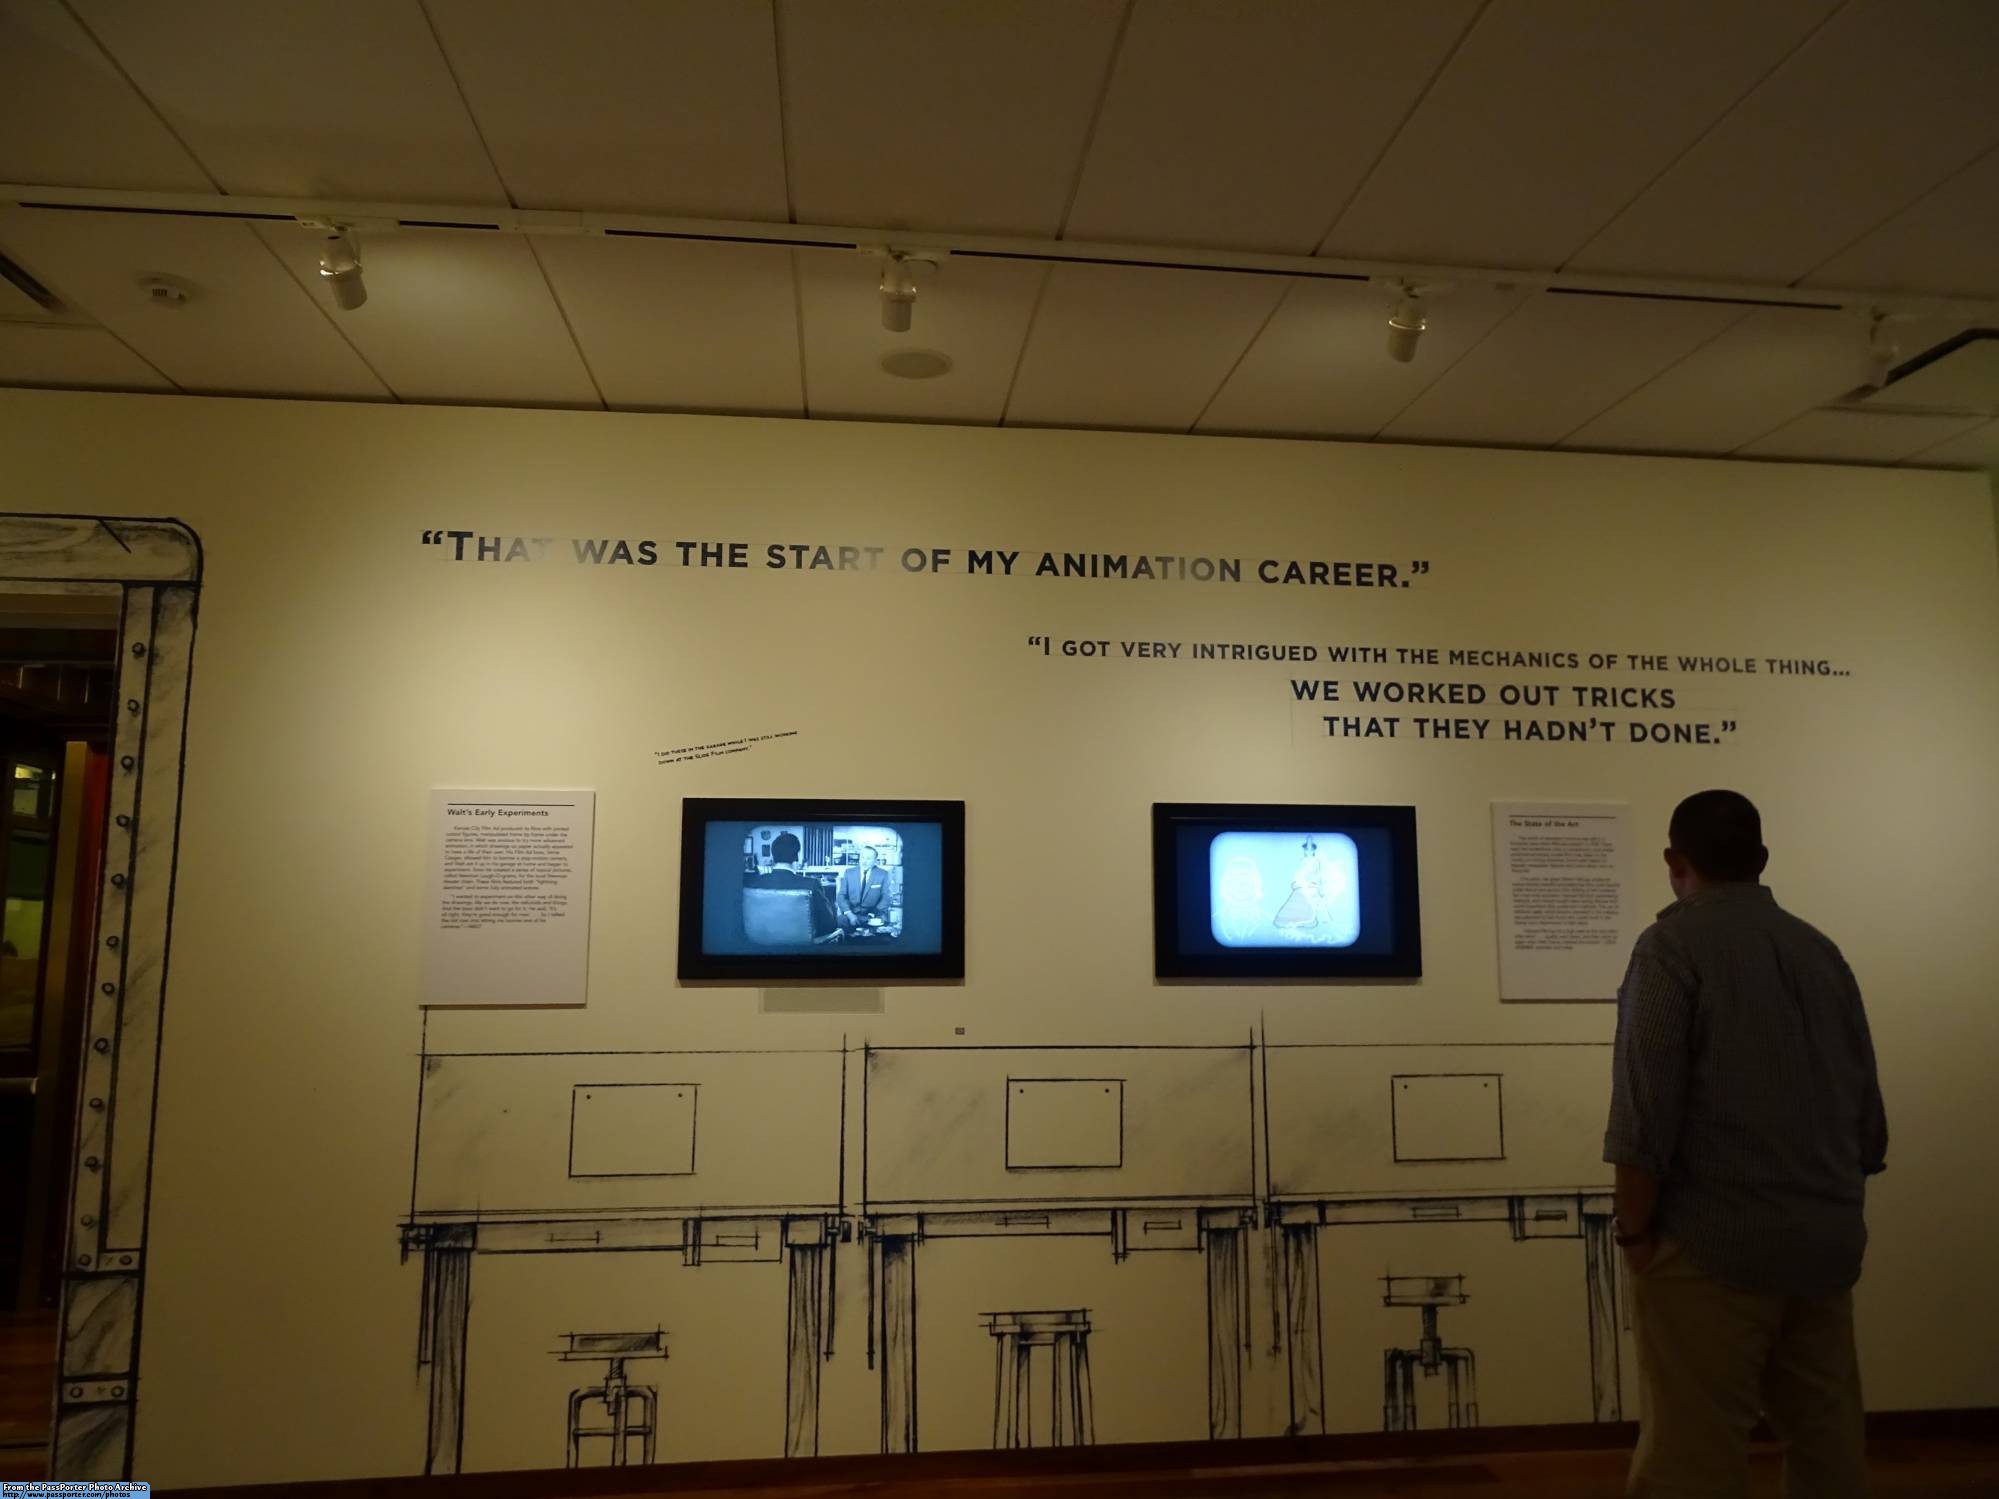 Learn more about Walt Disney at the Walt Disney Family Museum in San Francisco | PassPorter.com